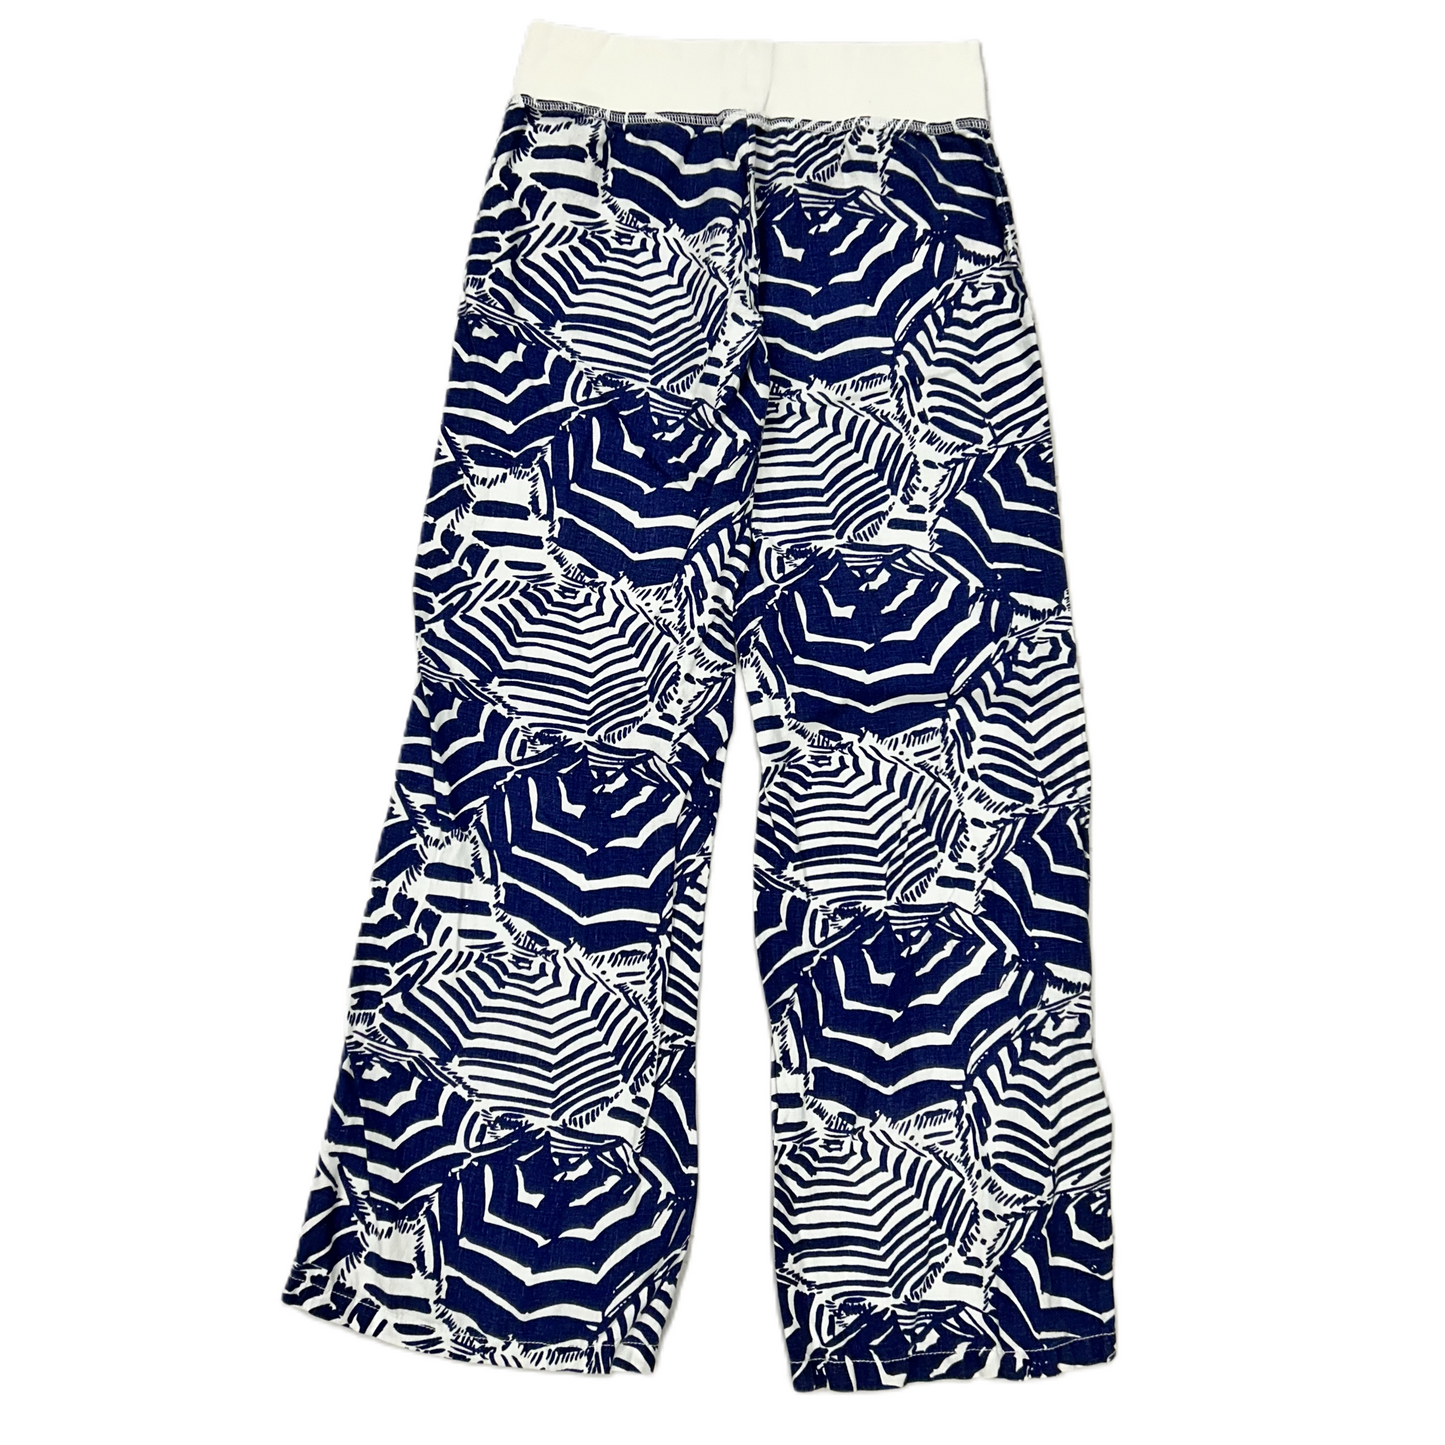 Navy Pants Designer By Lilly Pulitzer, Size: S